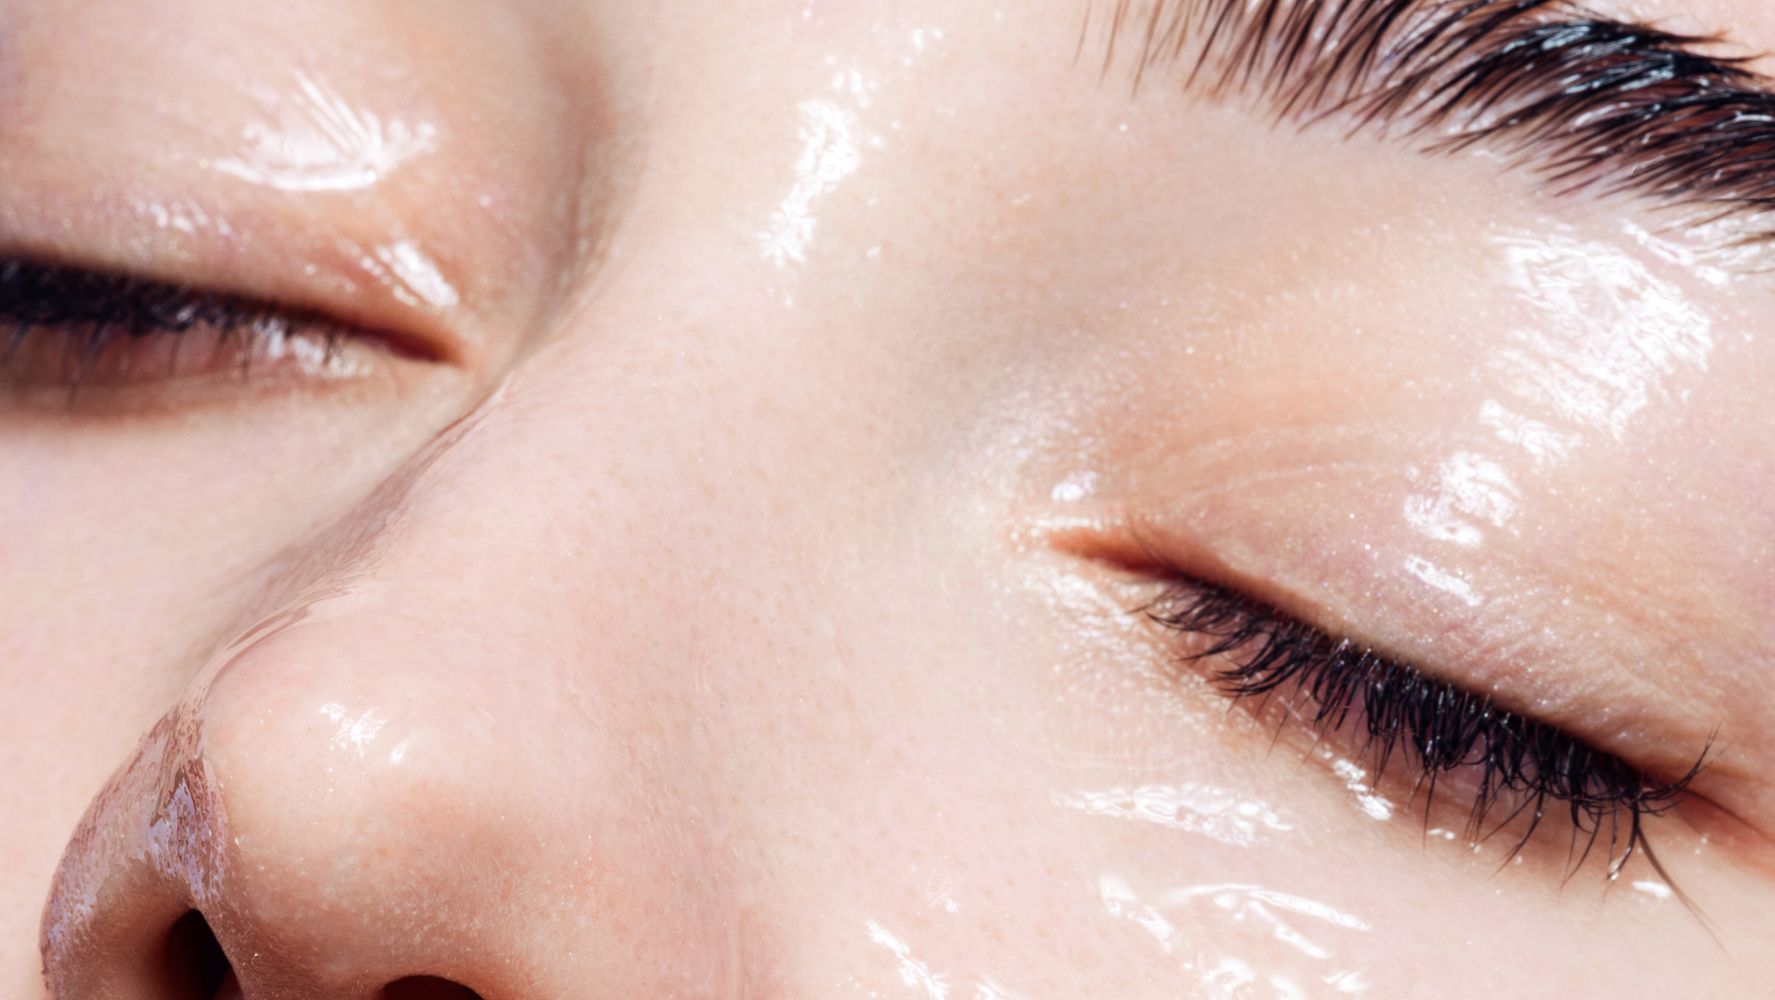 How To 'Slug' Your Skin The Right Way, According To Dermatologists